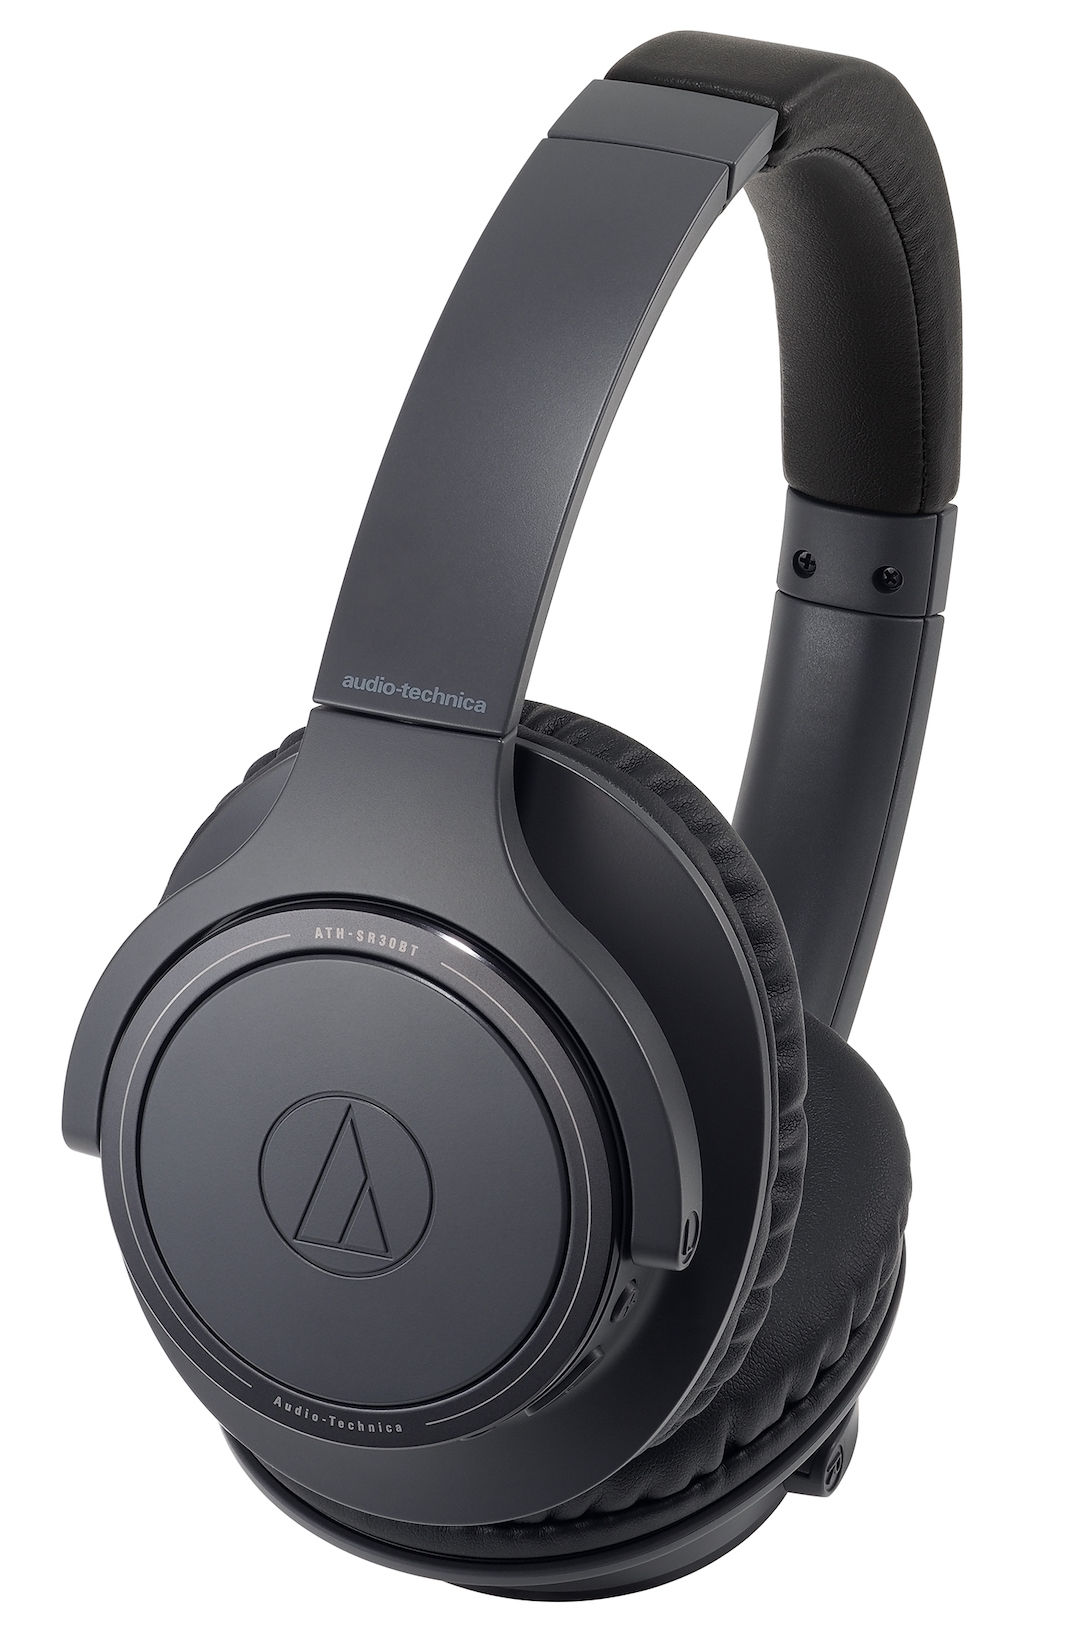 Audio Technica Ath Sr30bt Headphones With 70 Hour Battery Life Launched At Rs 7 990 91mobiles Com